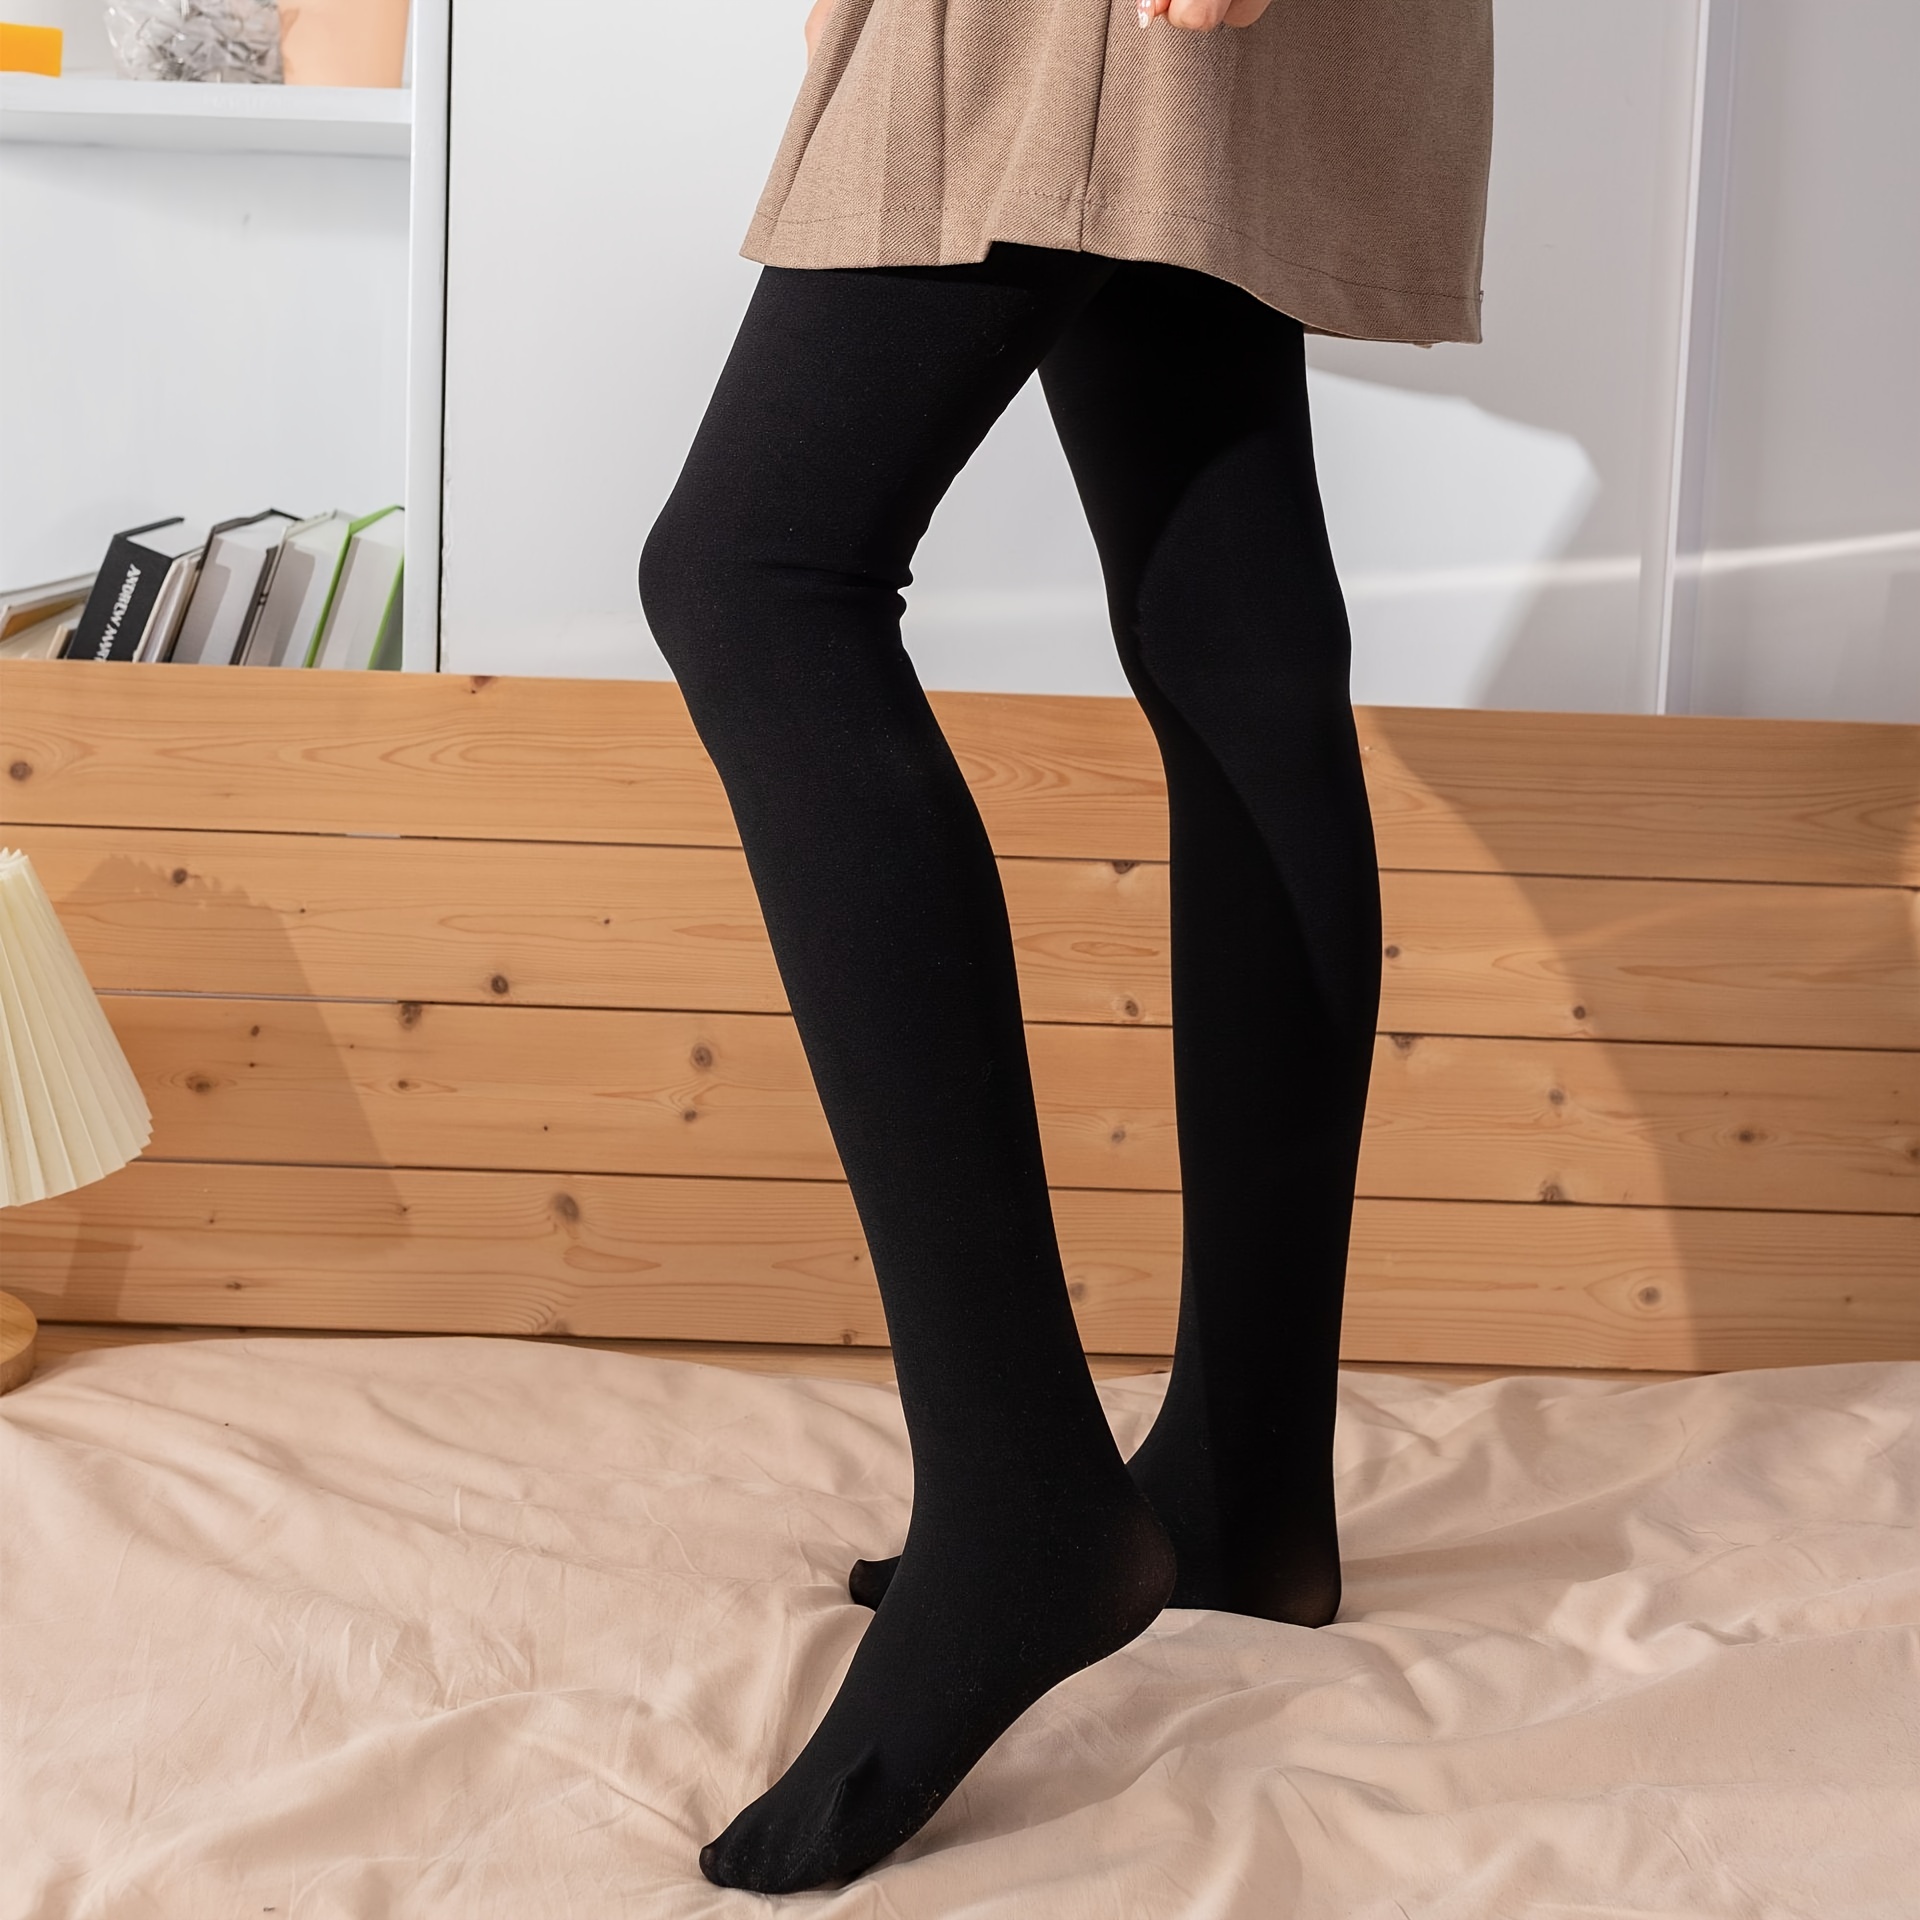 Japan's Fake Black Stockings offer sheer looks and winter-cold protection